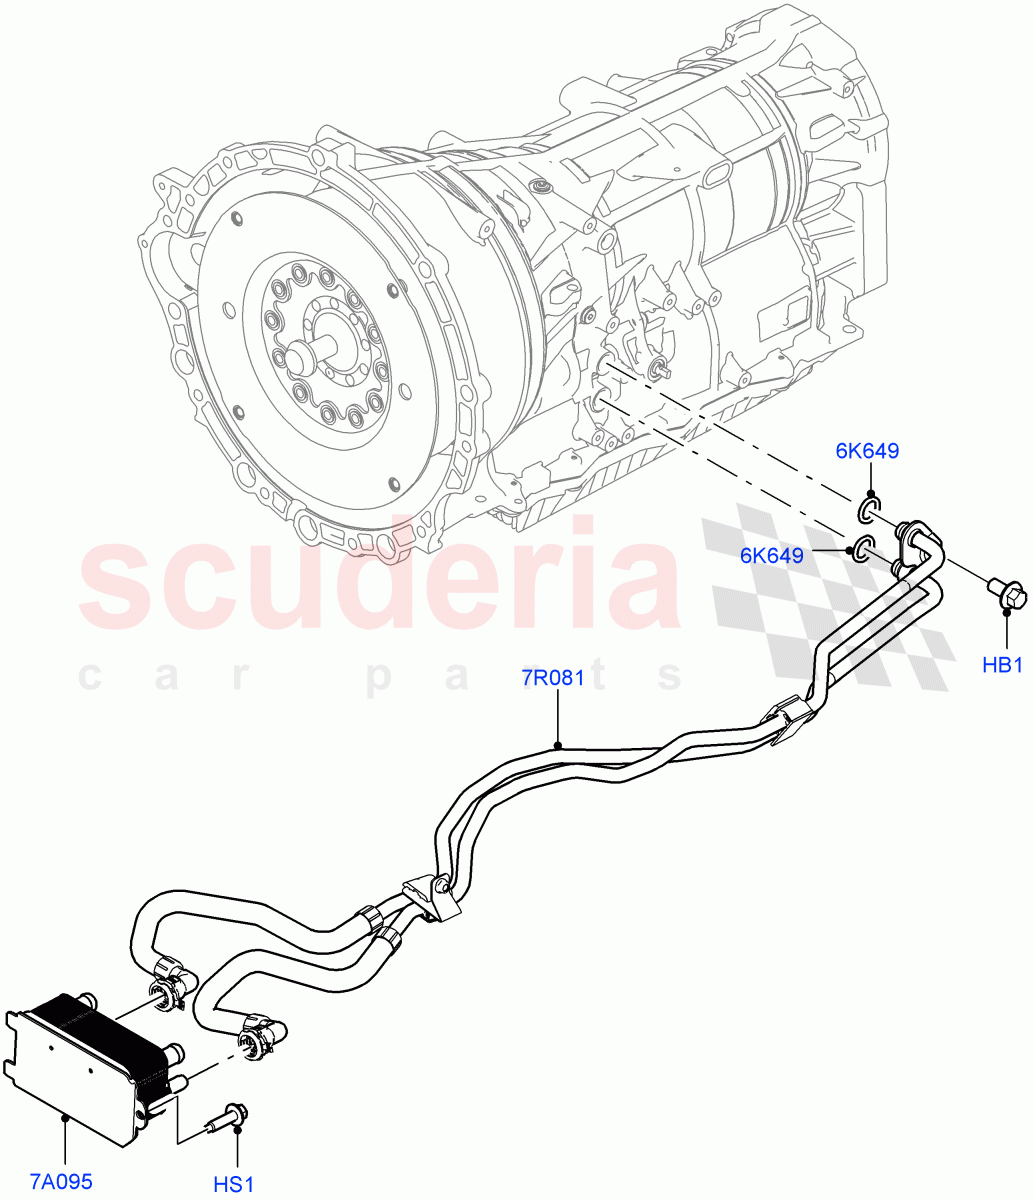 Transmission Cooling Systems(Solihull Plant Build)(2.0L I4 High DOHC AJ200 Petrol,8 Speed Auto Trans ZF 8HP45)((V)FROMJA000001) of Land Rover Land Rover Range Rover Sport (2014+) [3.0 I6 Turbo Petrol AJ20P6]